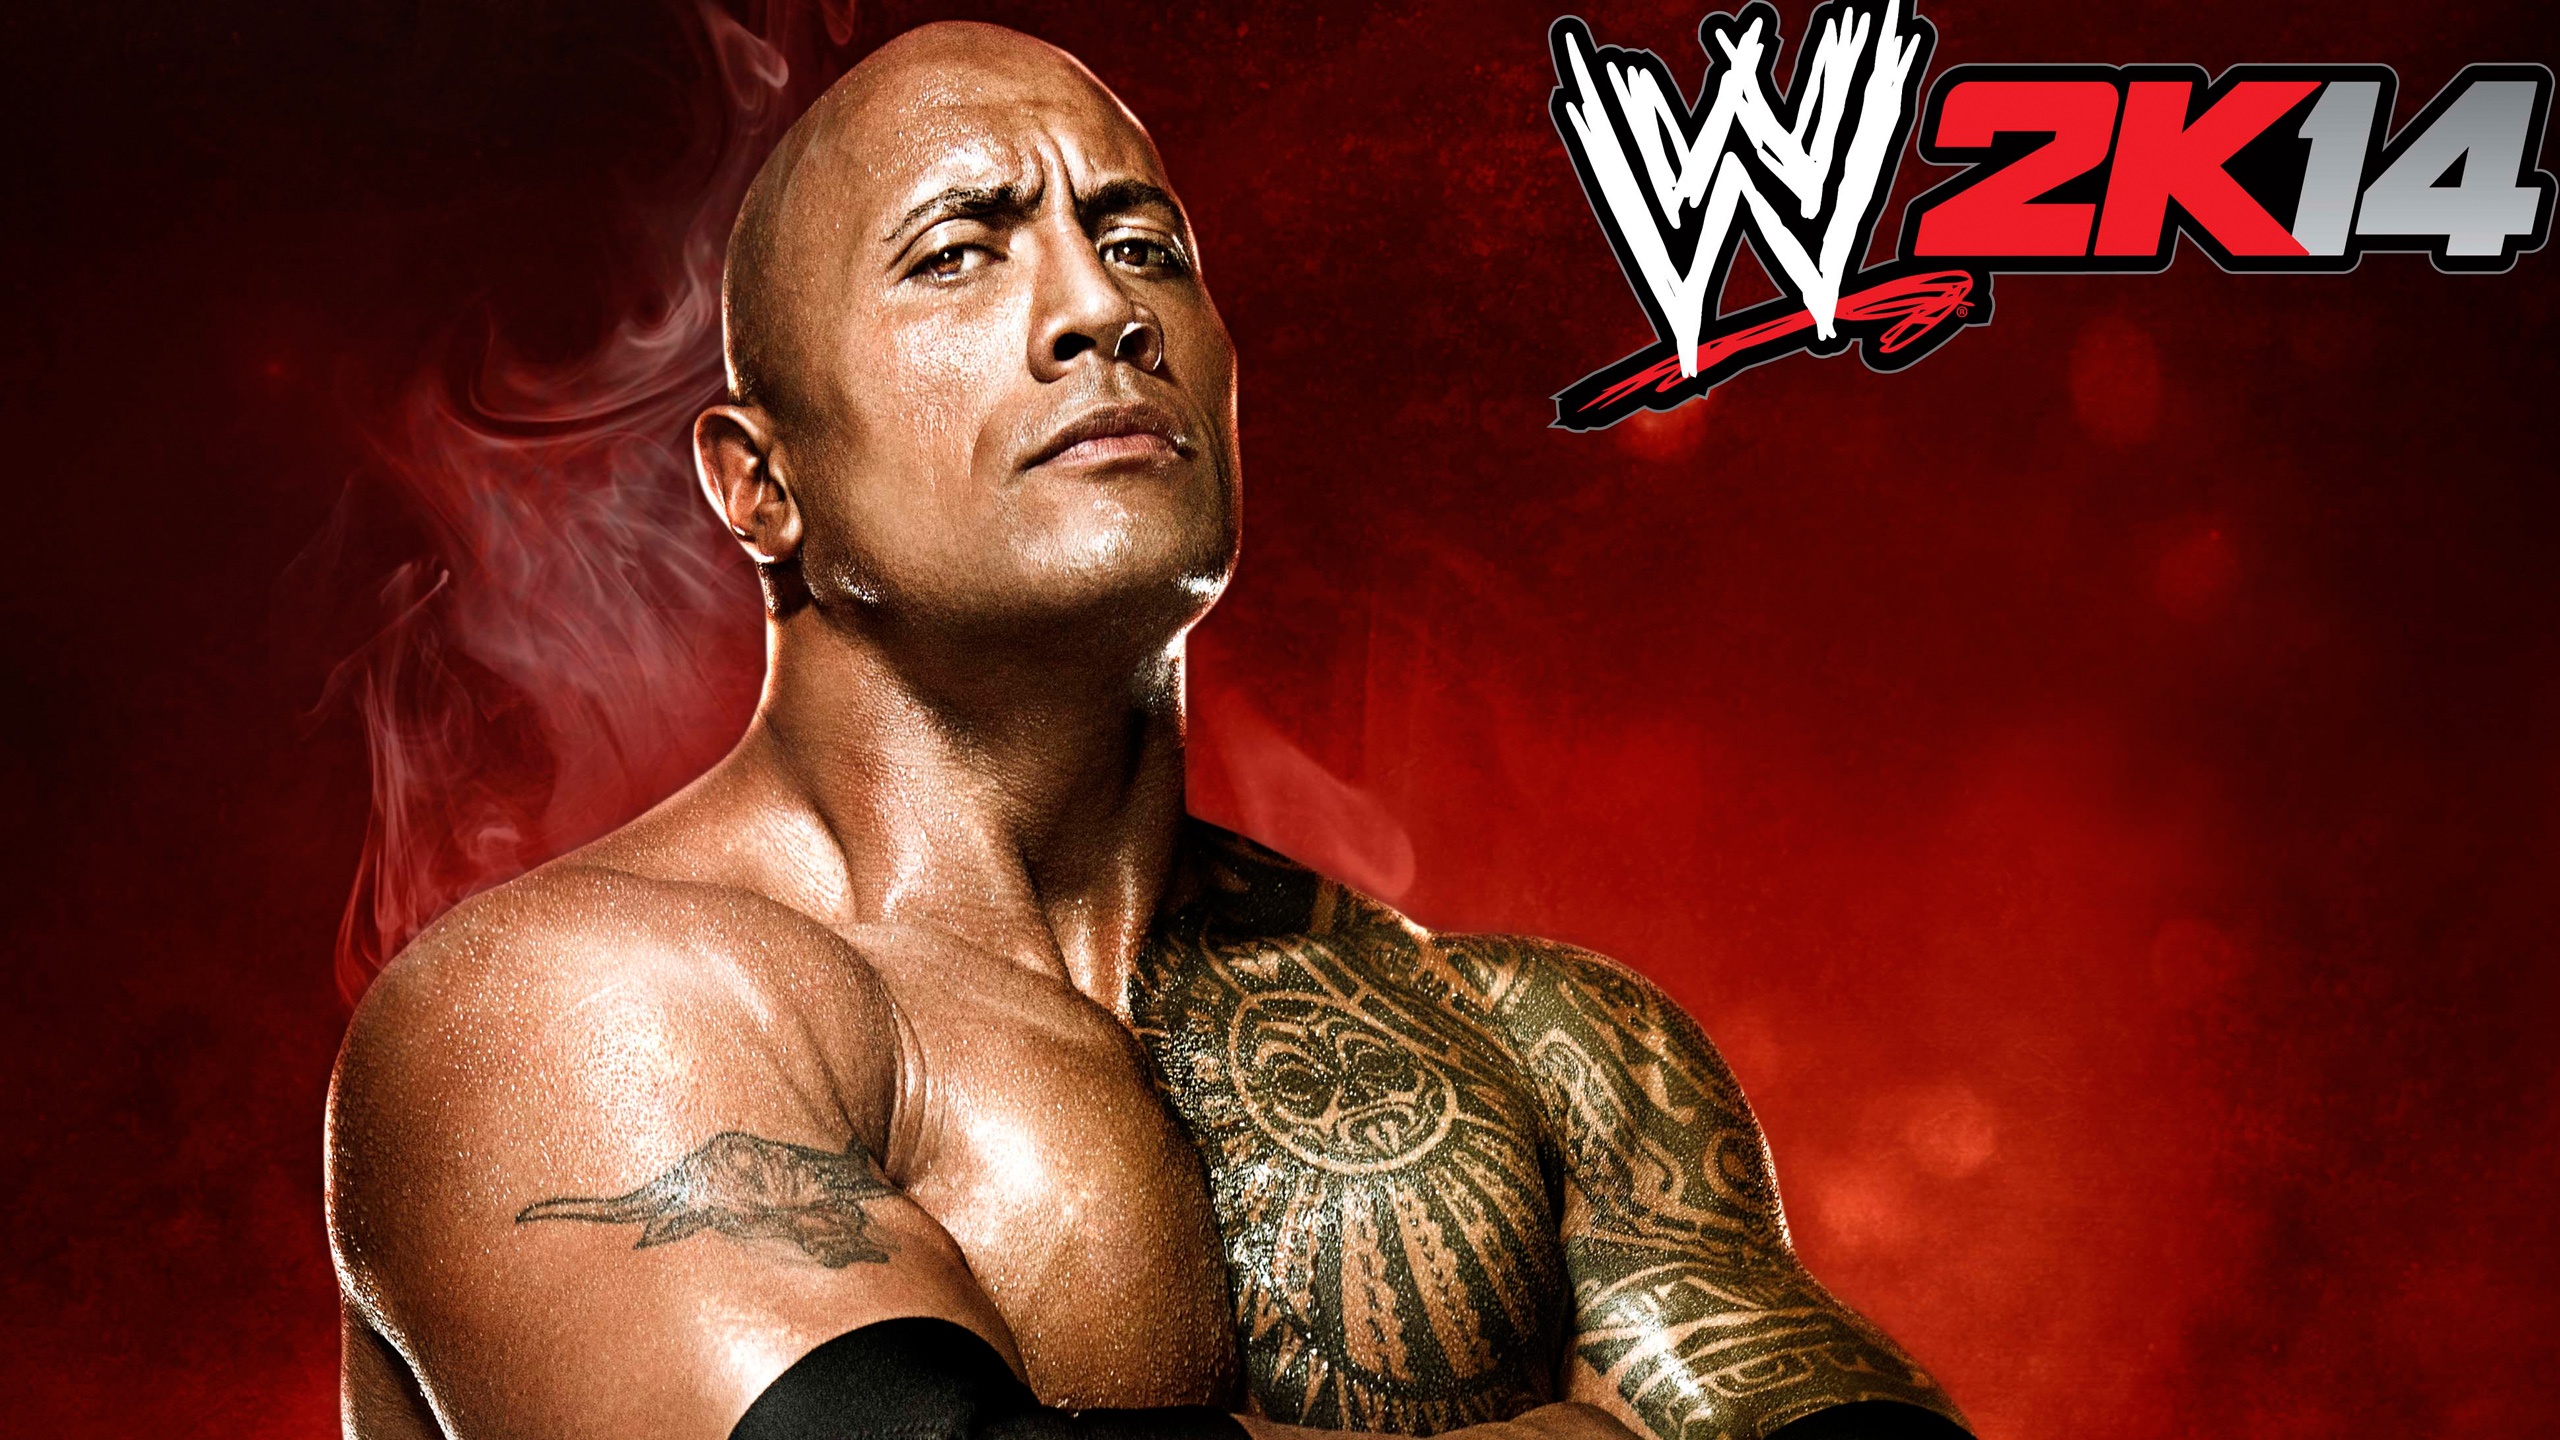 Wwe 2k14 Game Pics In 1080p